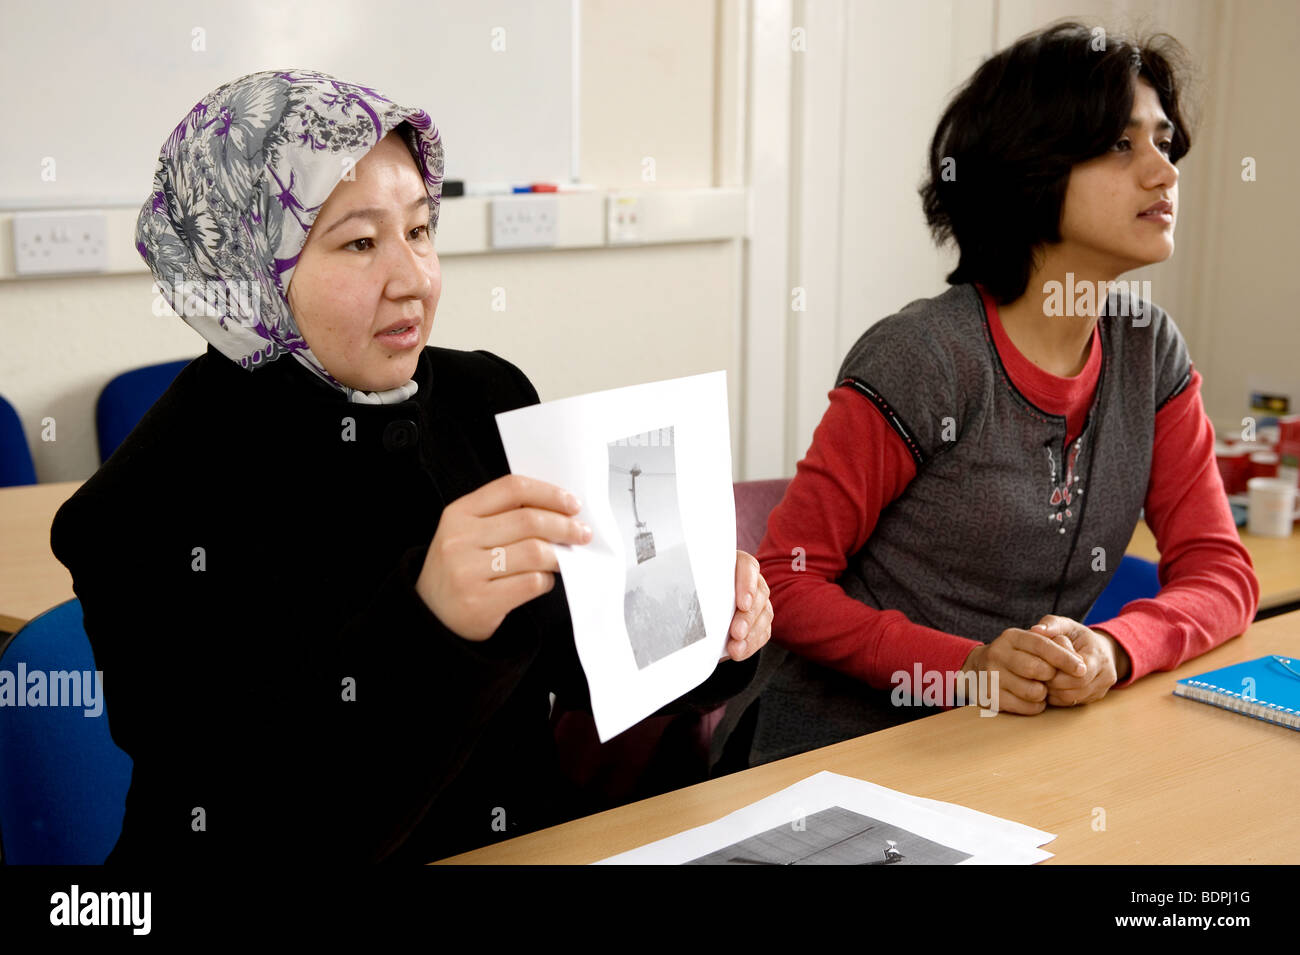 Foreign nationals learn English in a classroom using pictures. Stock Photo